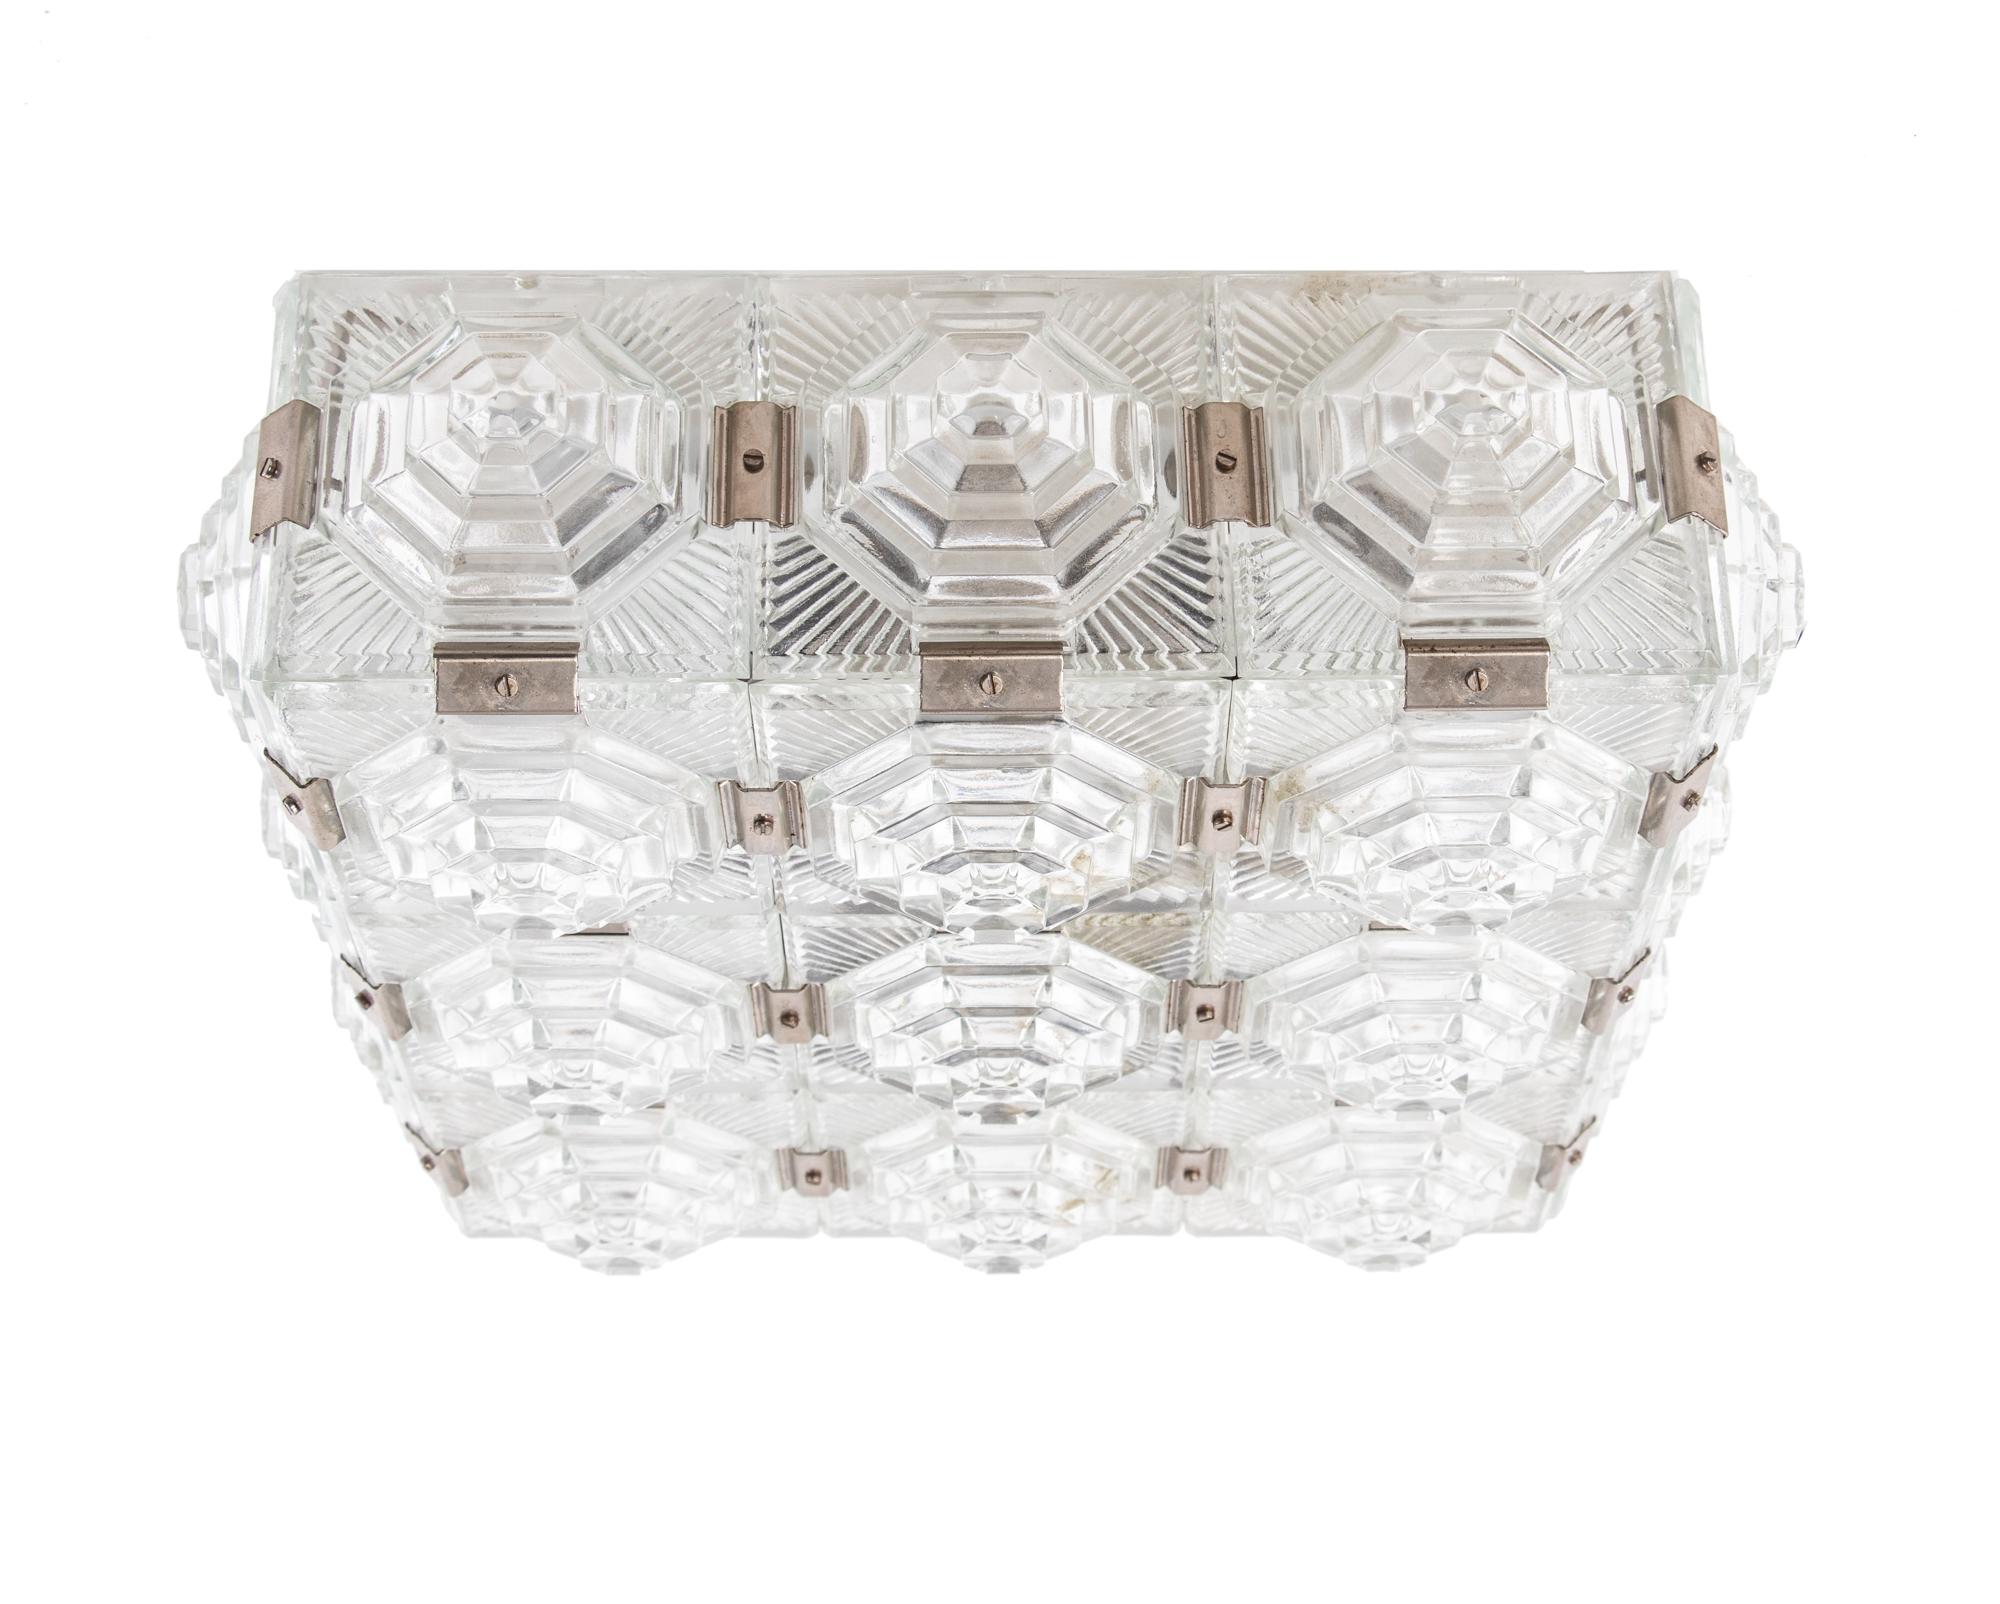 Elegant bohemian flush mount ceiling lamp composed of thick textured glass elements with chromed fittings on a white lacquered brass frame. Manufactured by Kamenicky, Czechoslovakia in the 1960s. 

Style: mid century, modernist. 
Colors: clear,